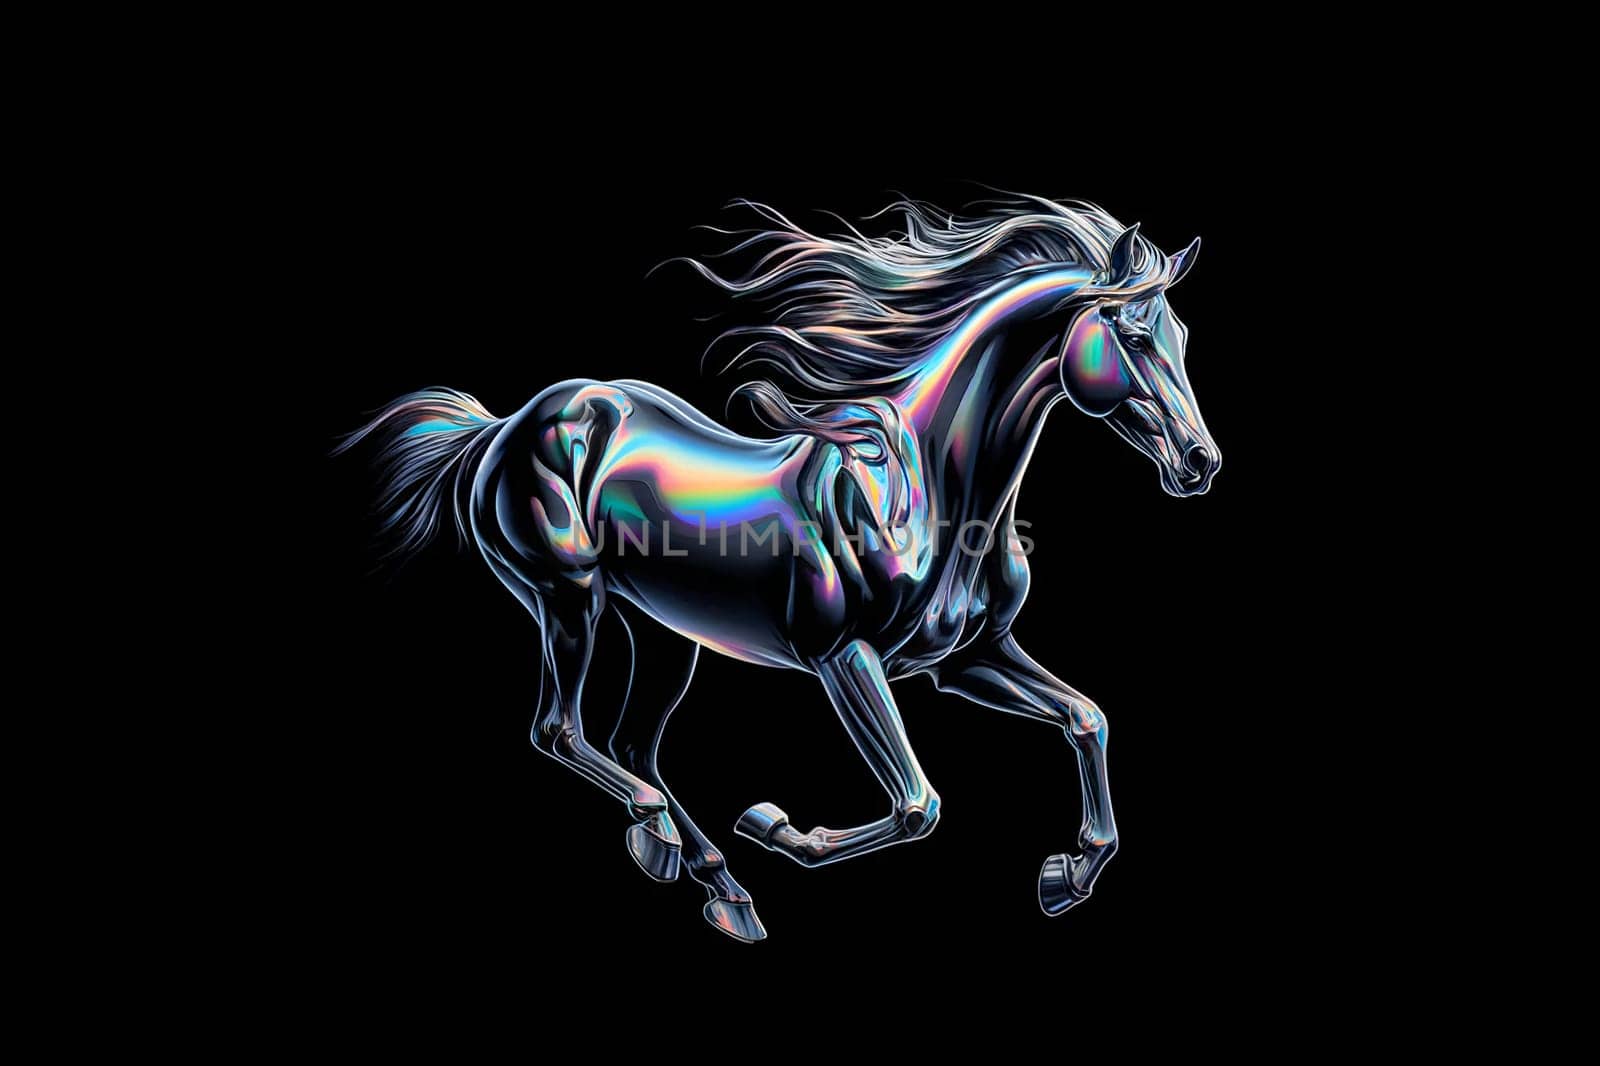 holographic image of a galloping horse on a black background. The horse is captured in mid-gallop by Annado